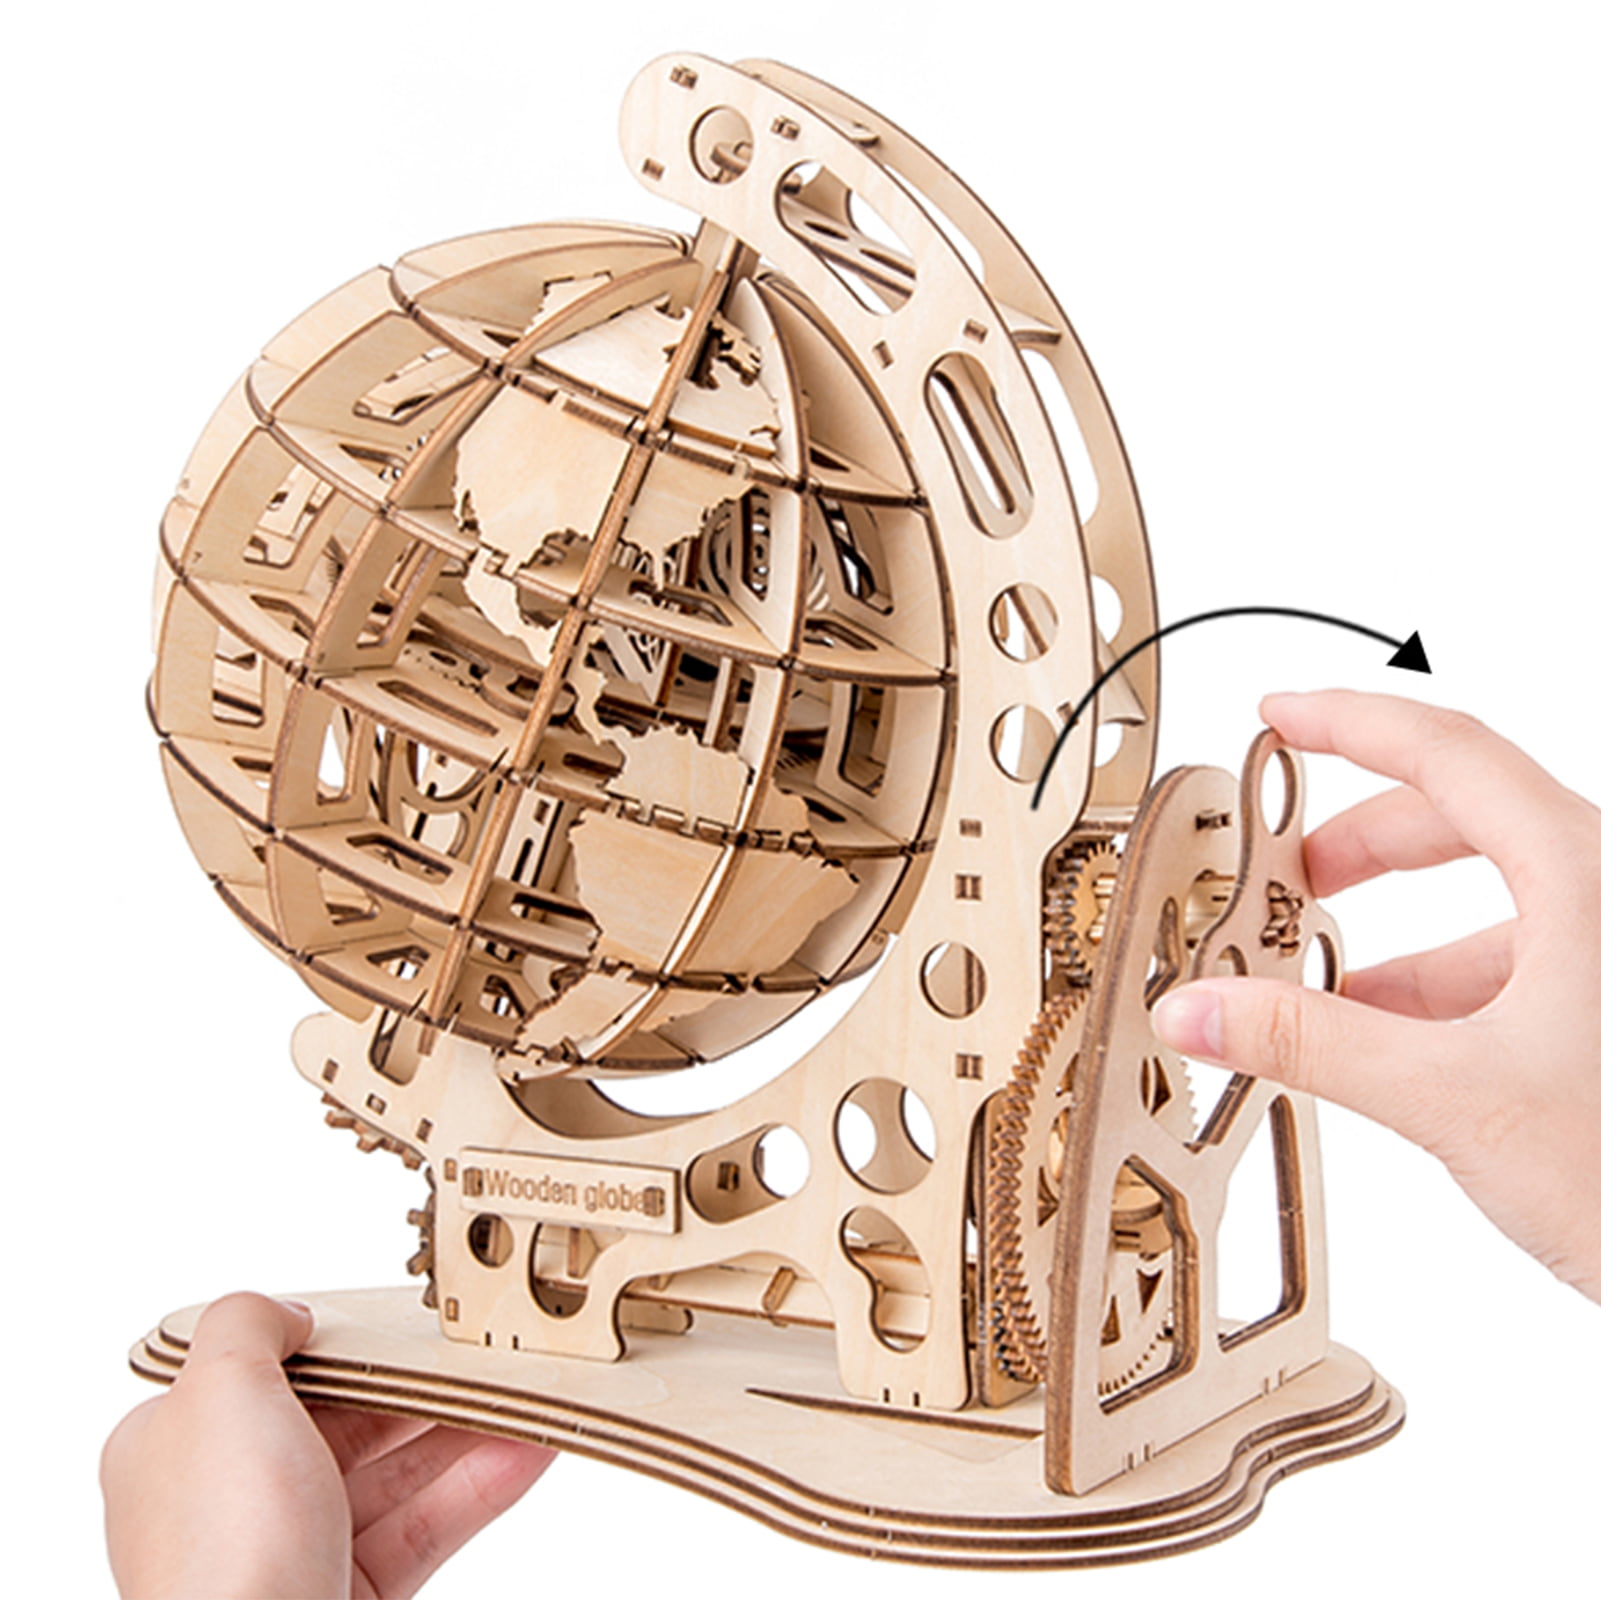 DIY Educational Toy for Children Kids Boys Girls 3D Wooden Globe Puzzle Adult Craft Model Building Kits 